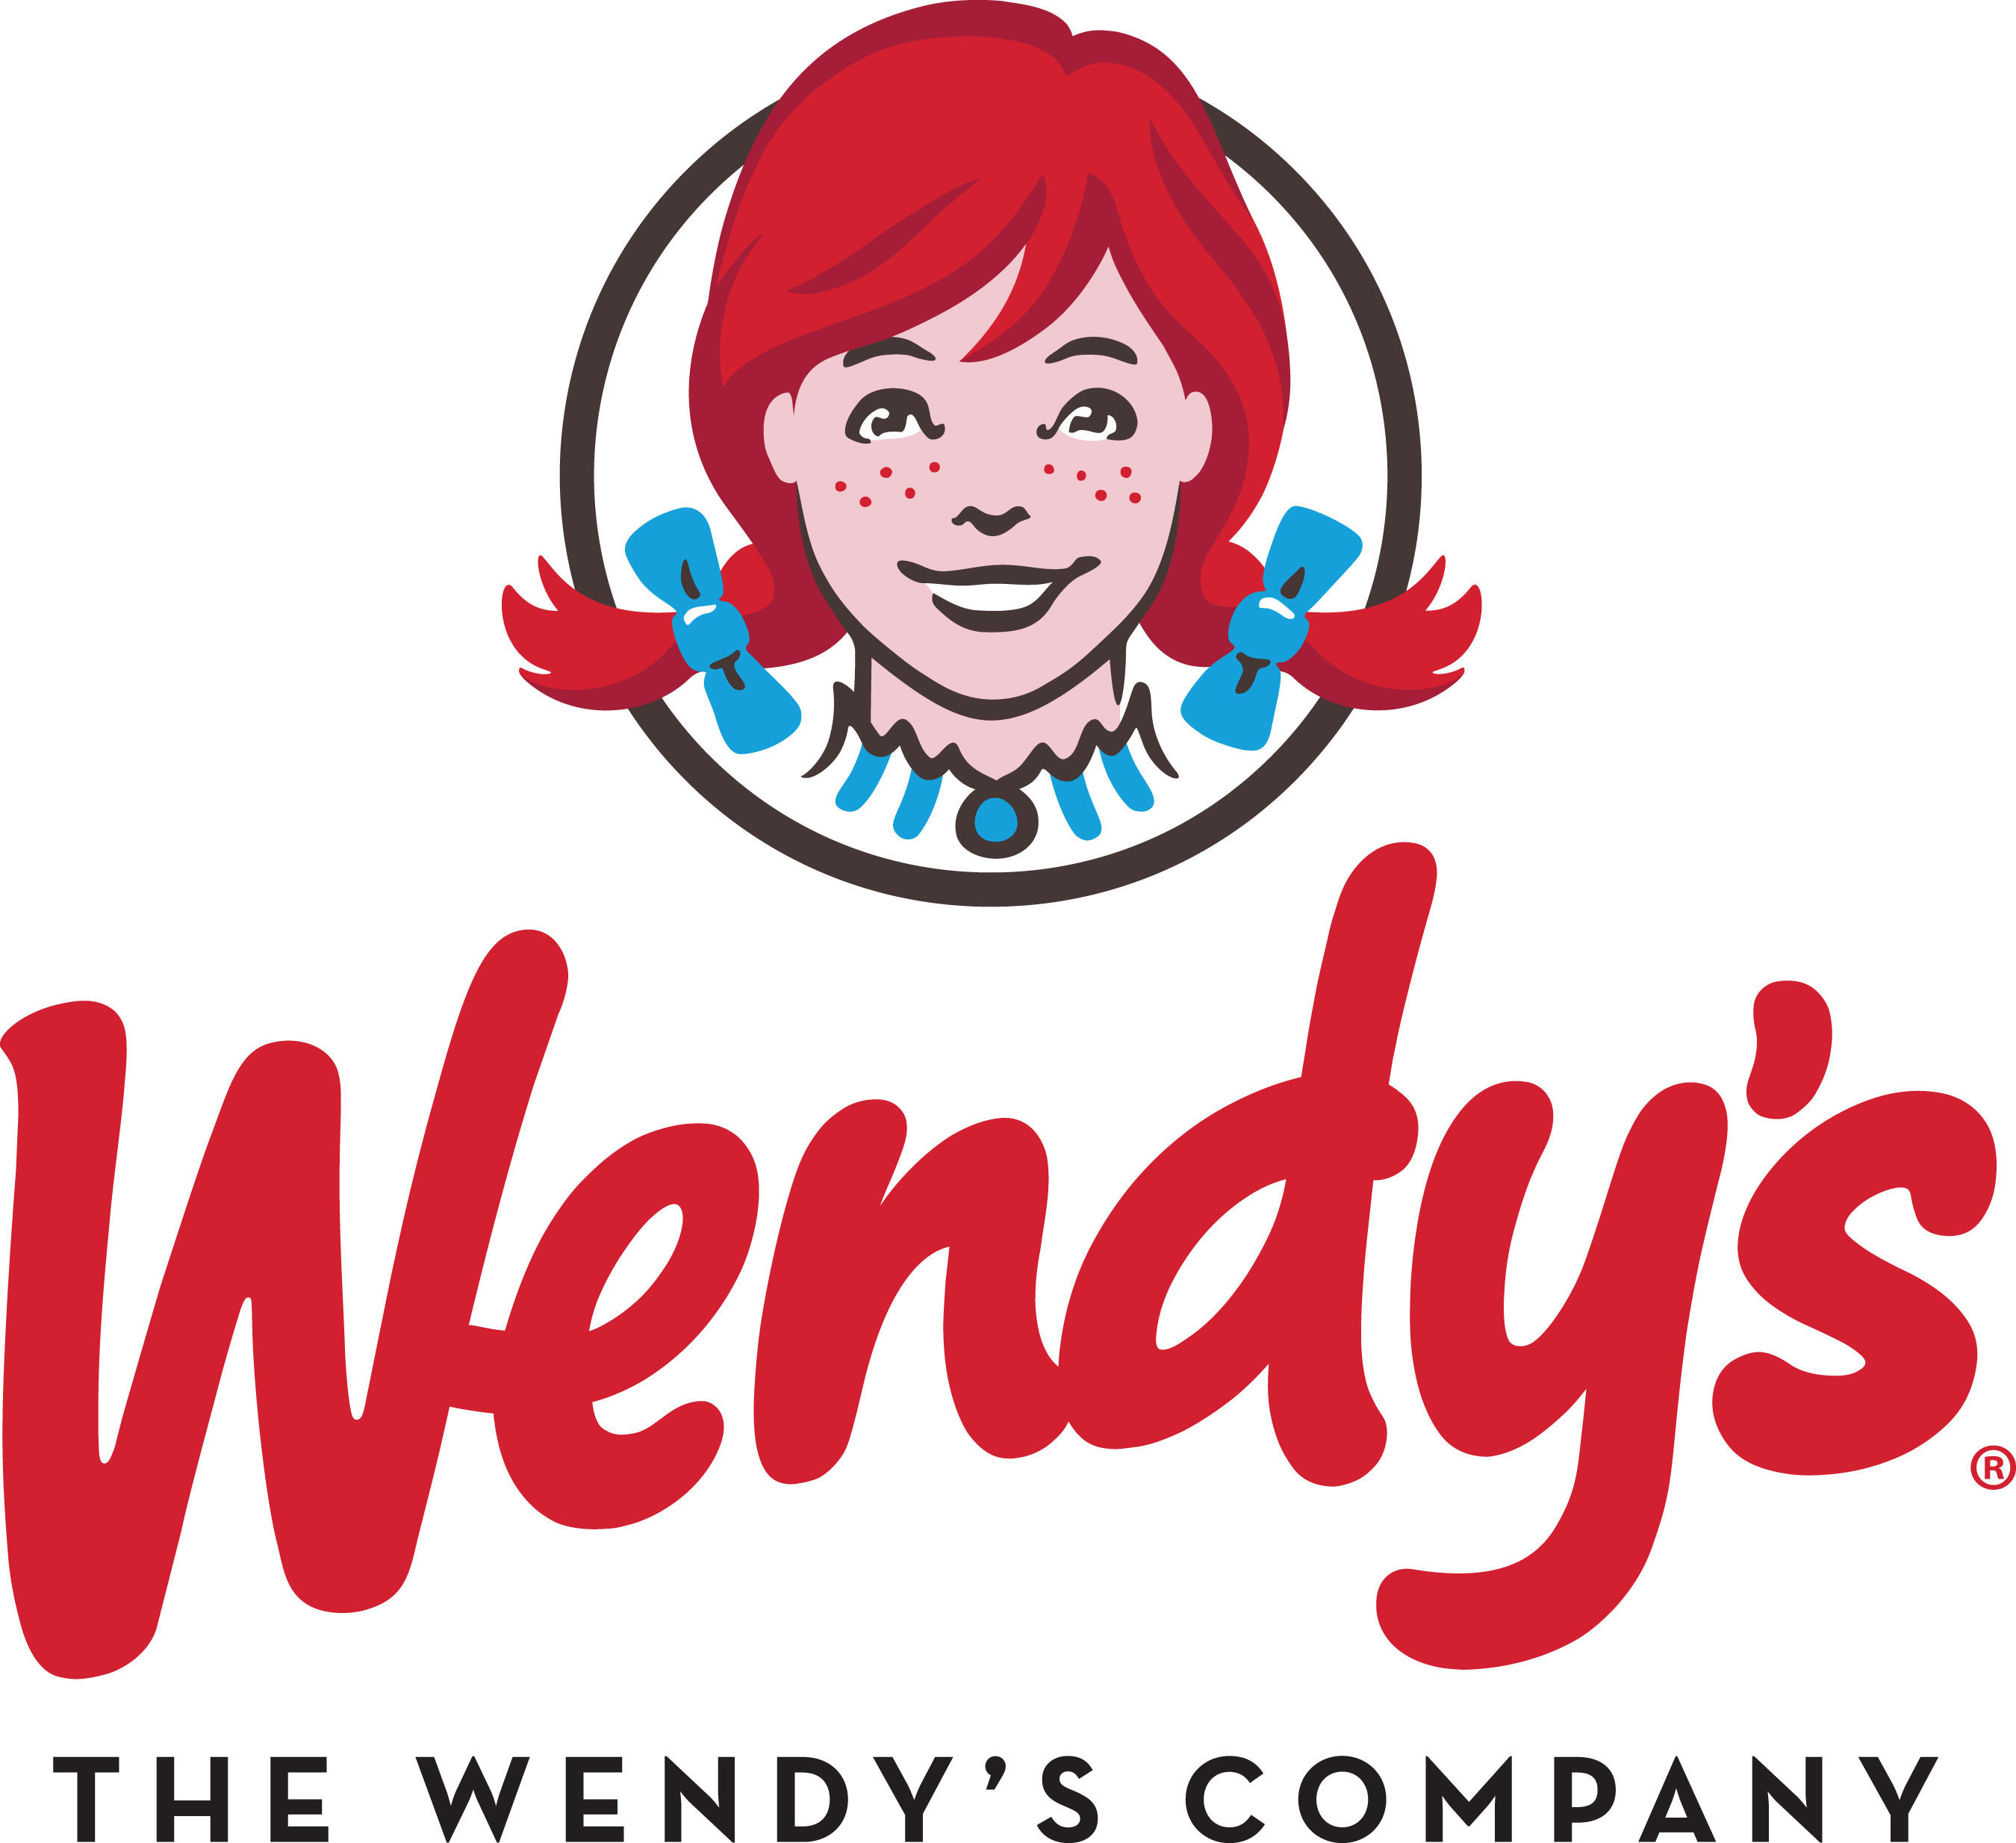 The Wendy's Company is the world's third-largest quick-service hamburger company. The Wendy's system includes approximately 6,500 franchise and Company-operated restaurants in the United States and 28 countries and U.S. territories worldwide. For more information, visit  www.aboutwendys.com . (PRNewsFoto/The Wendy's Company)